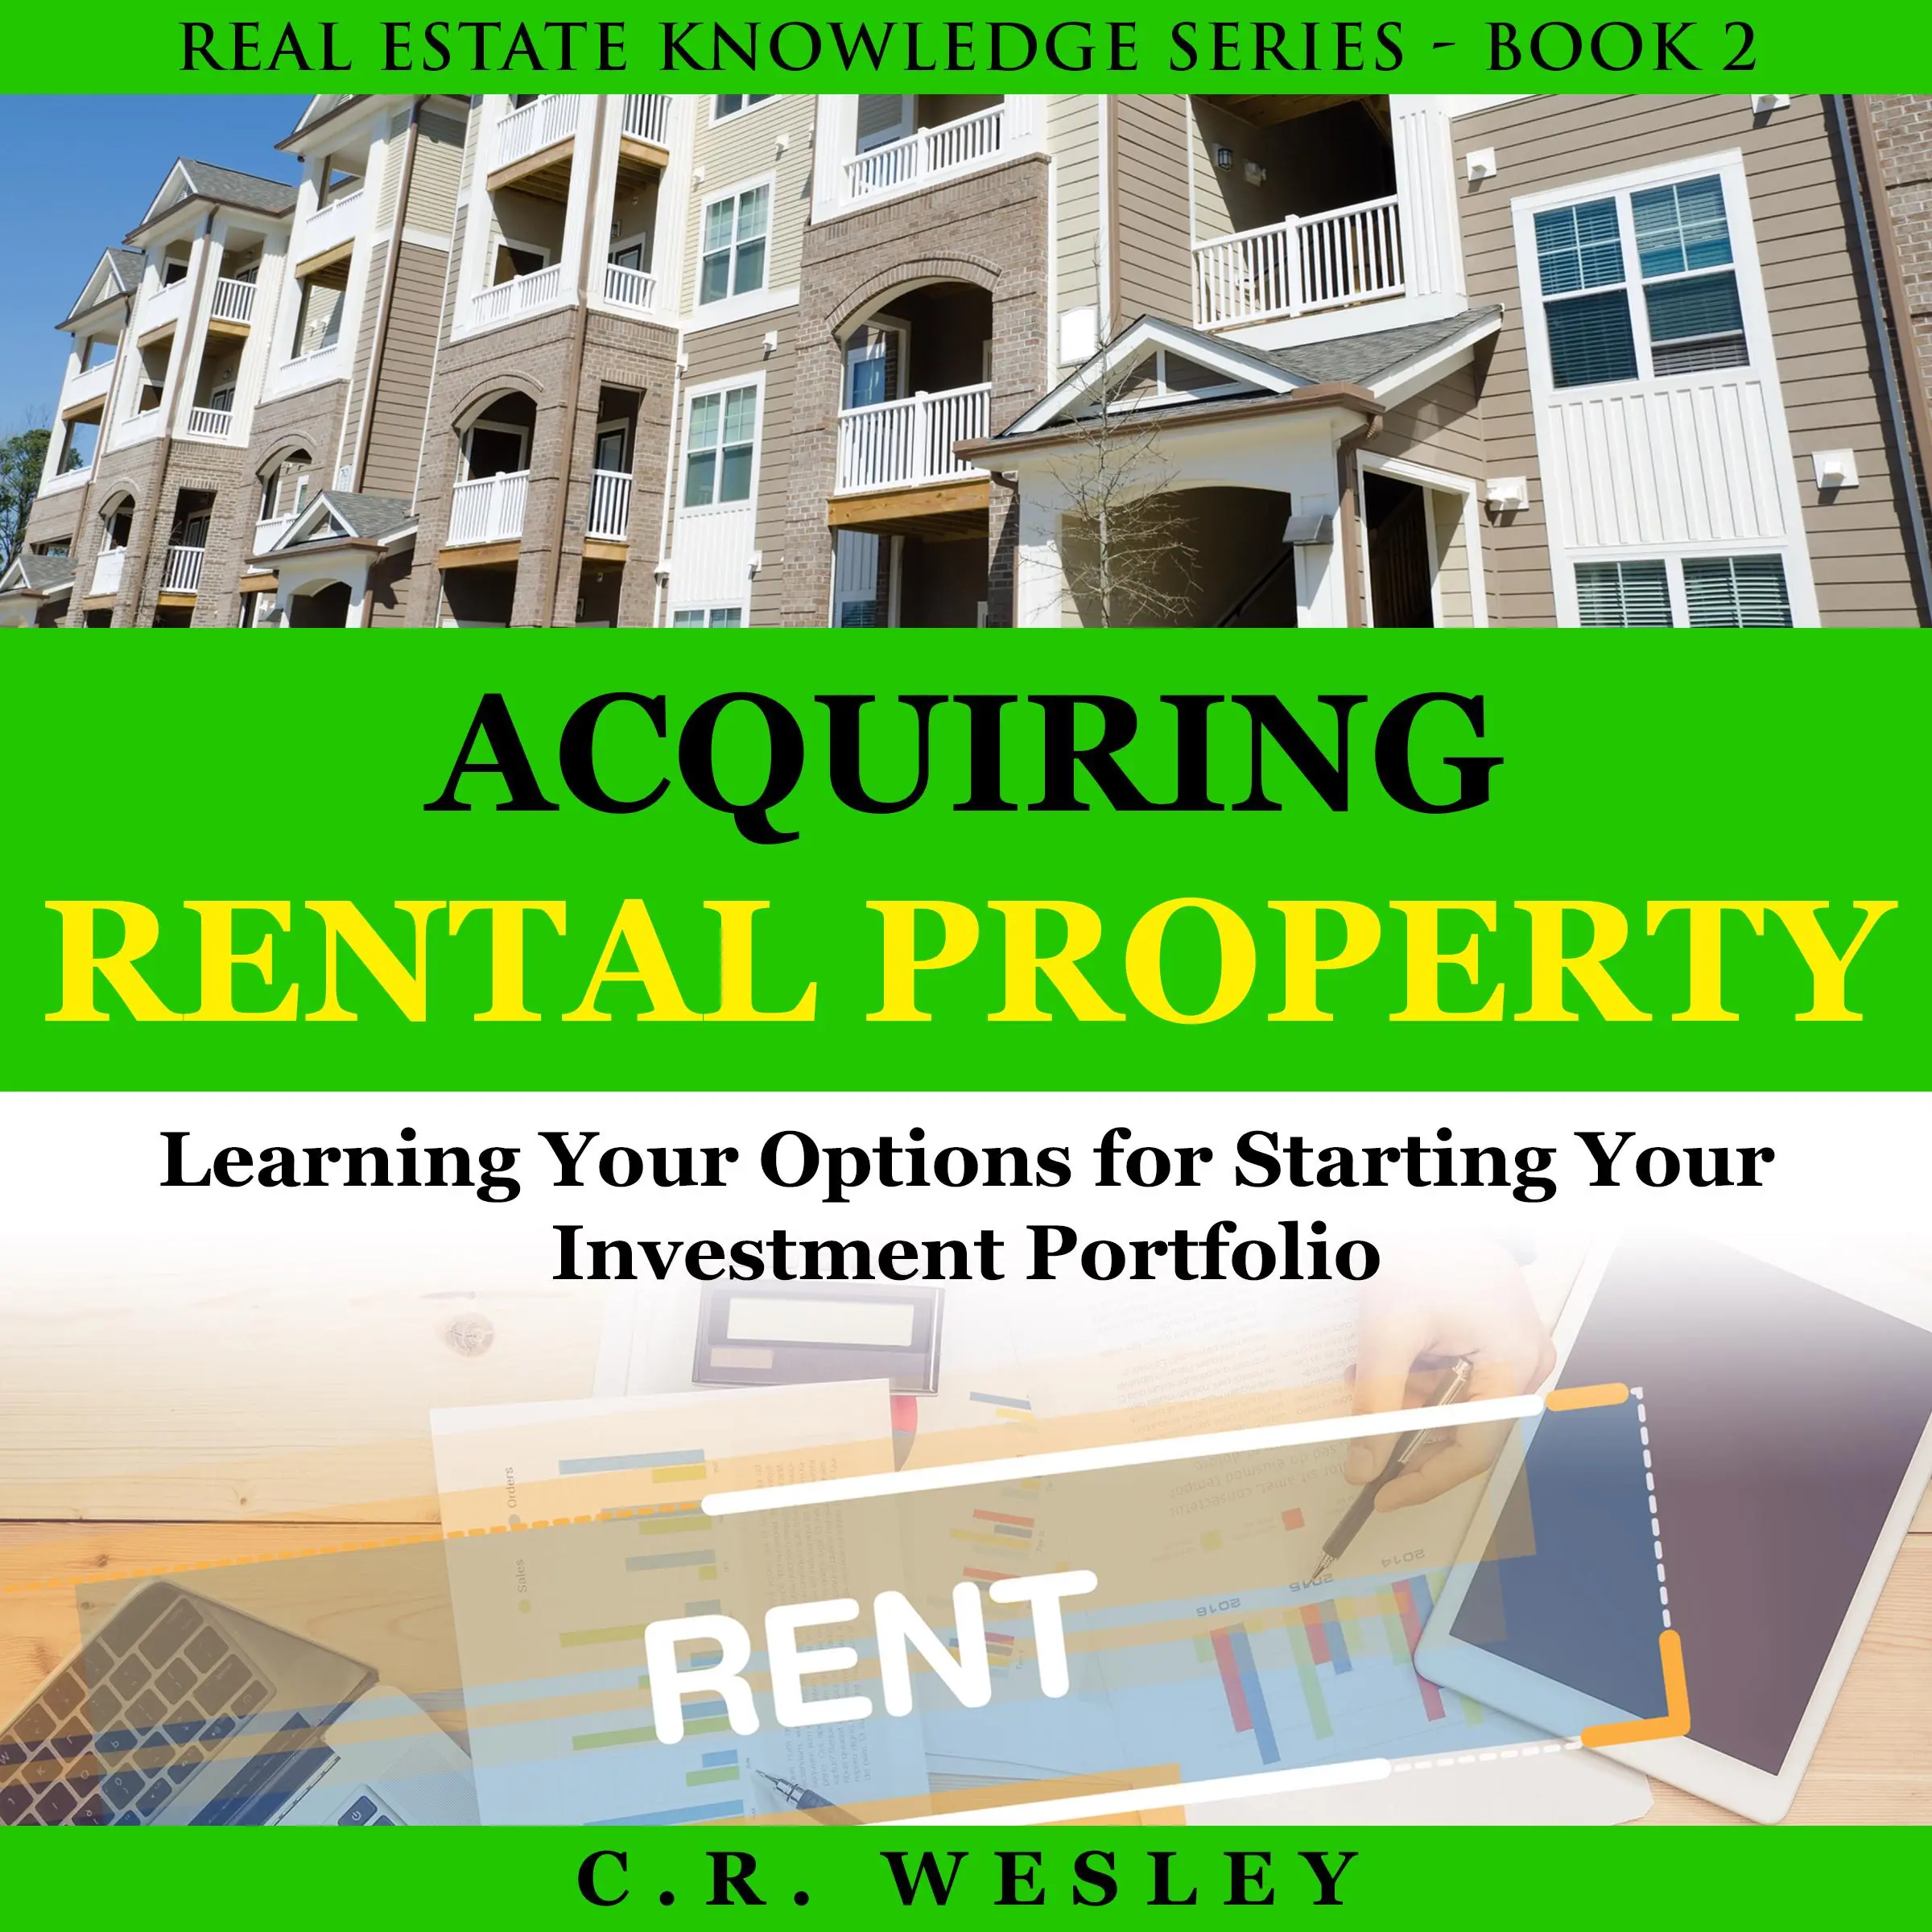 Acquiring Rental Property Audiobook by C.R. Wesley